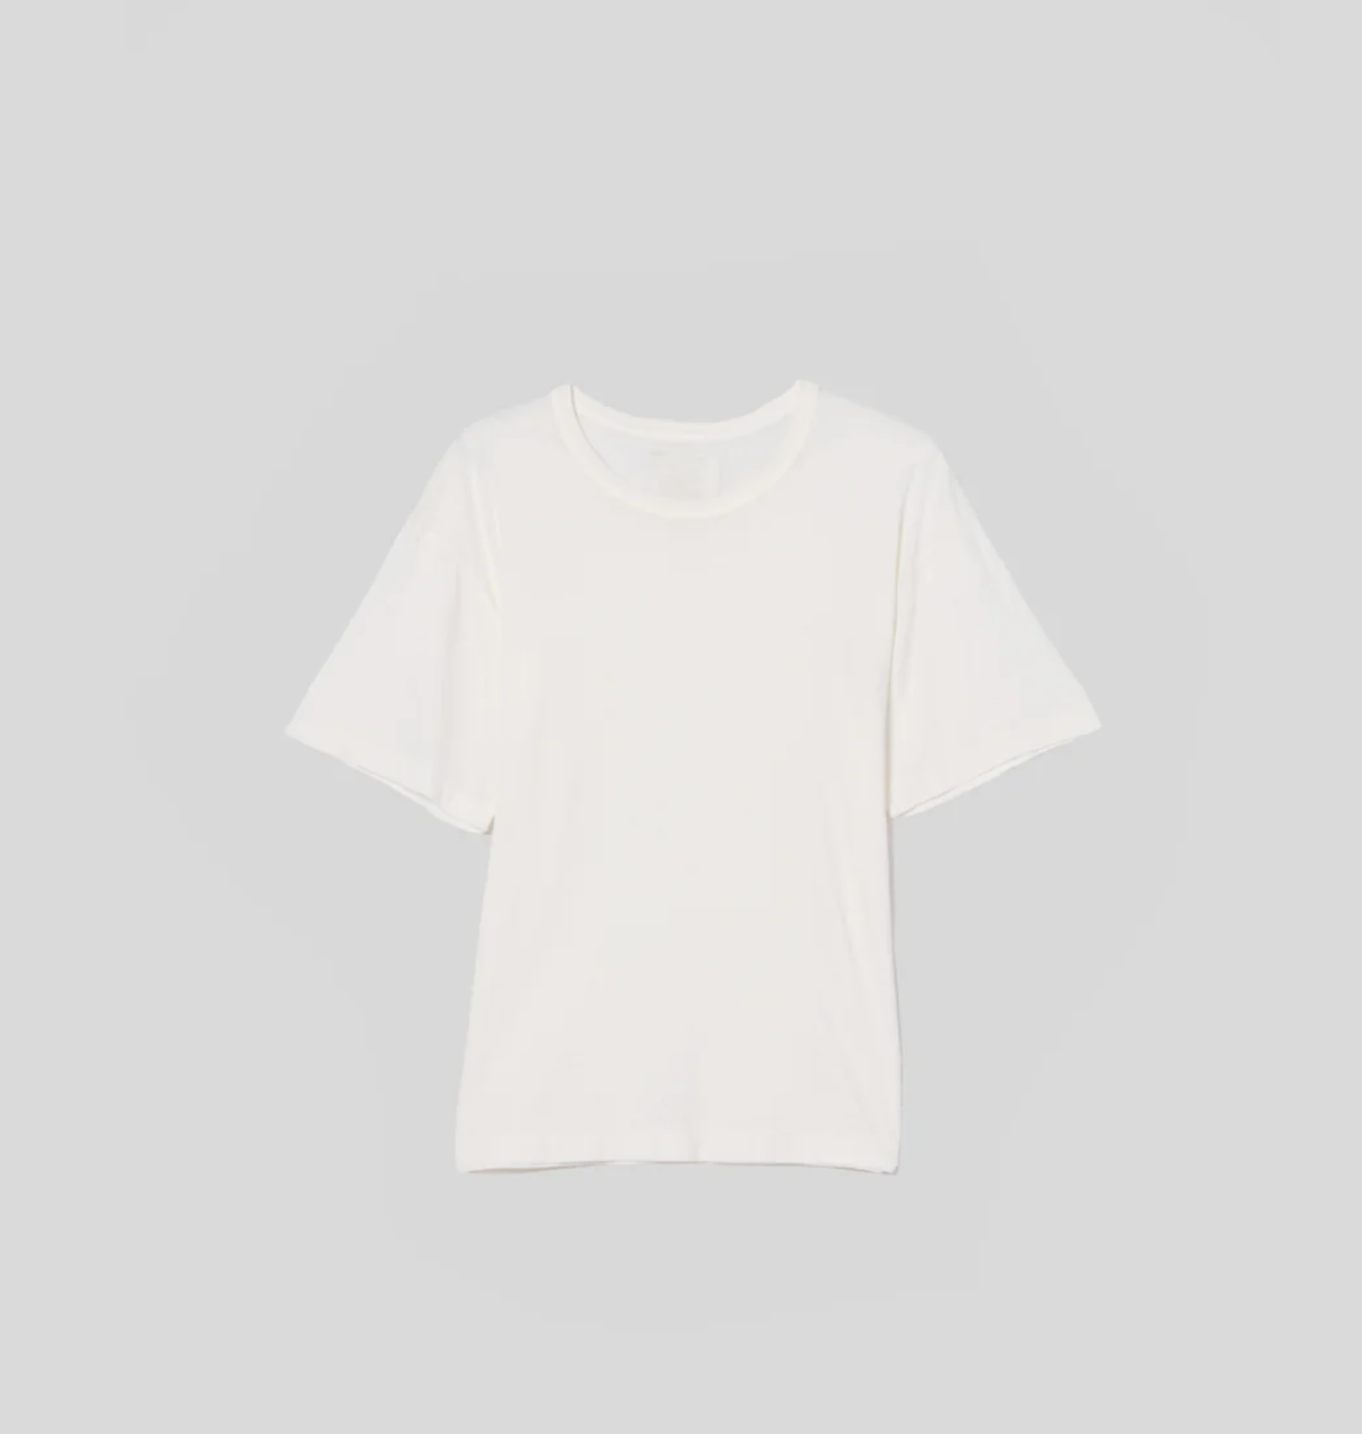 A Elisabetta Relaxed Tee In Pashmina displayed against a light gray background. The shirt has short sleeves and a round neckline, presented in a flat lay view with an Arizona style.